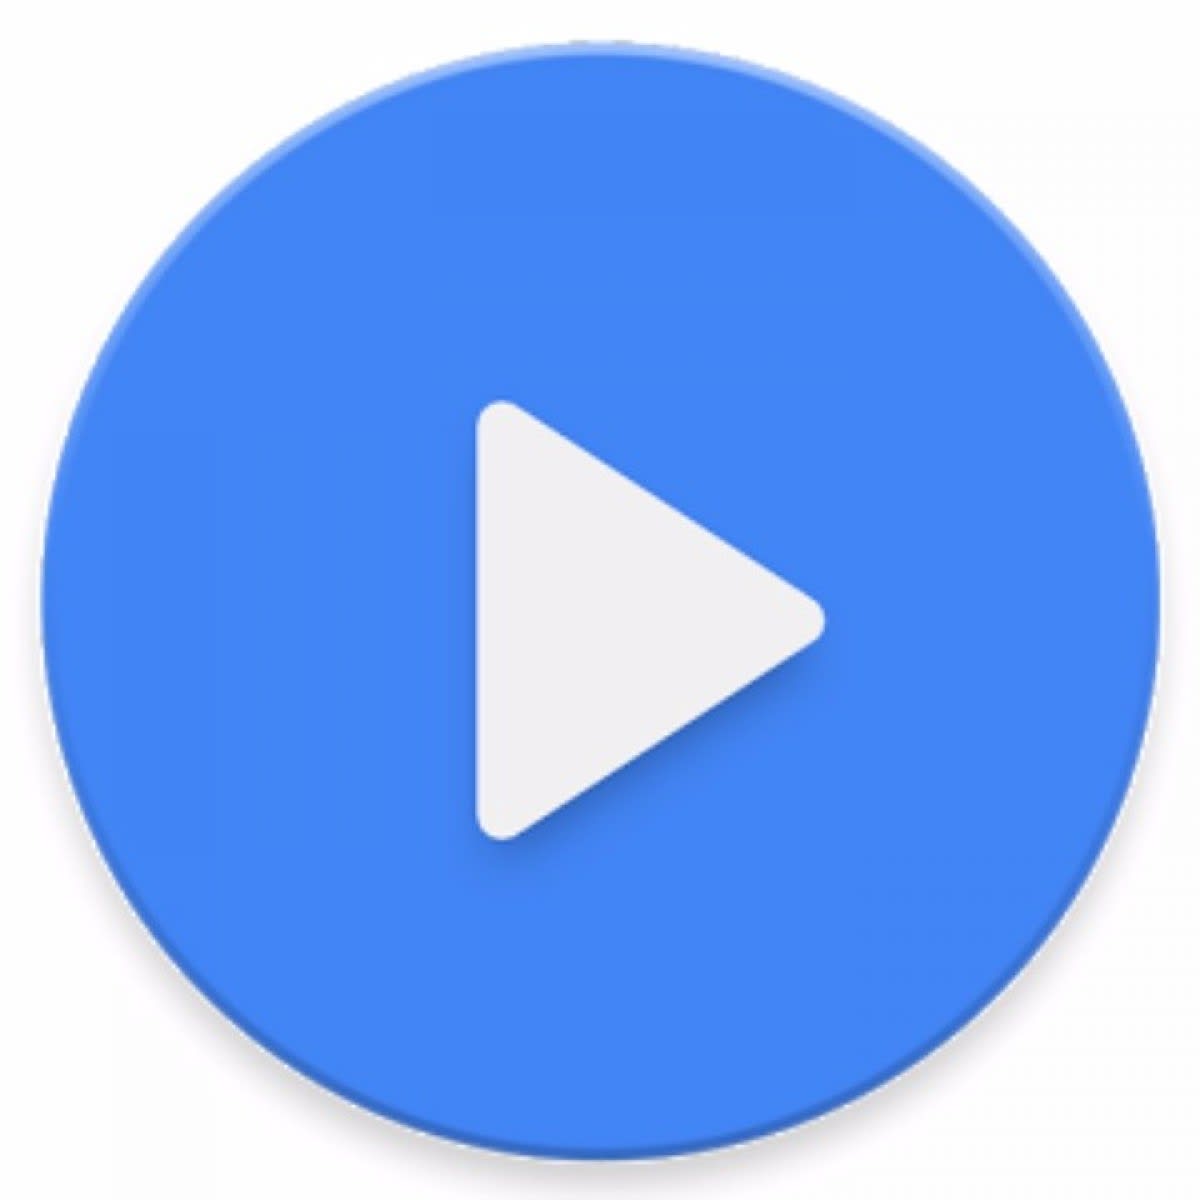 MX Player Pro APK Latest Version Download For Android